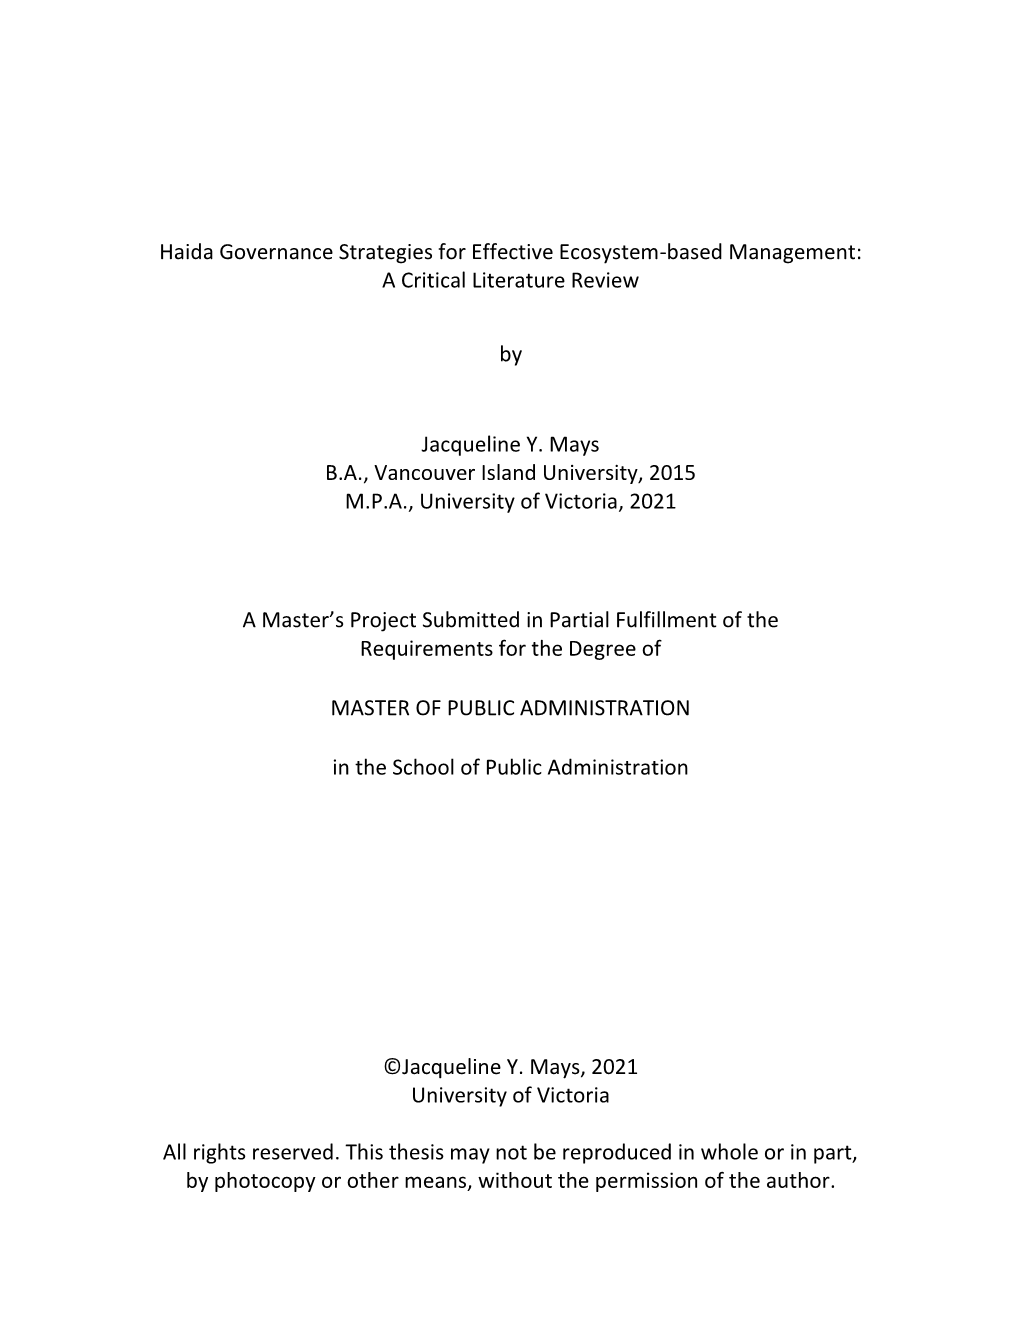 Haida Governance Strategies for Effective Ecosystem-Based Management: a Critical Literature Review